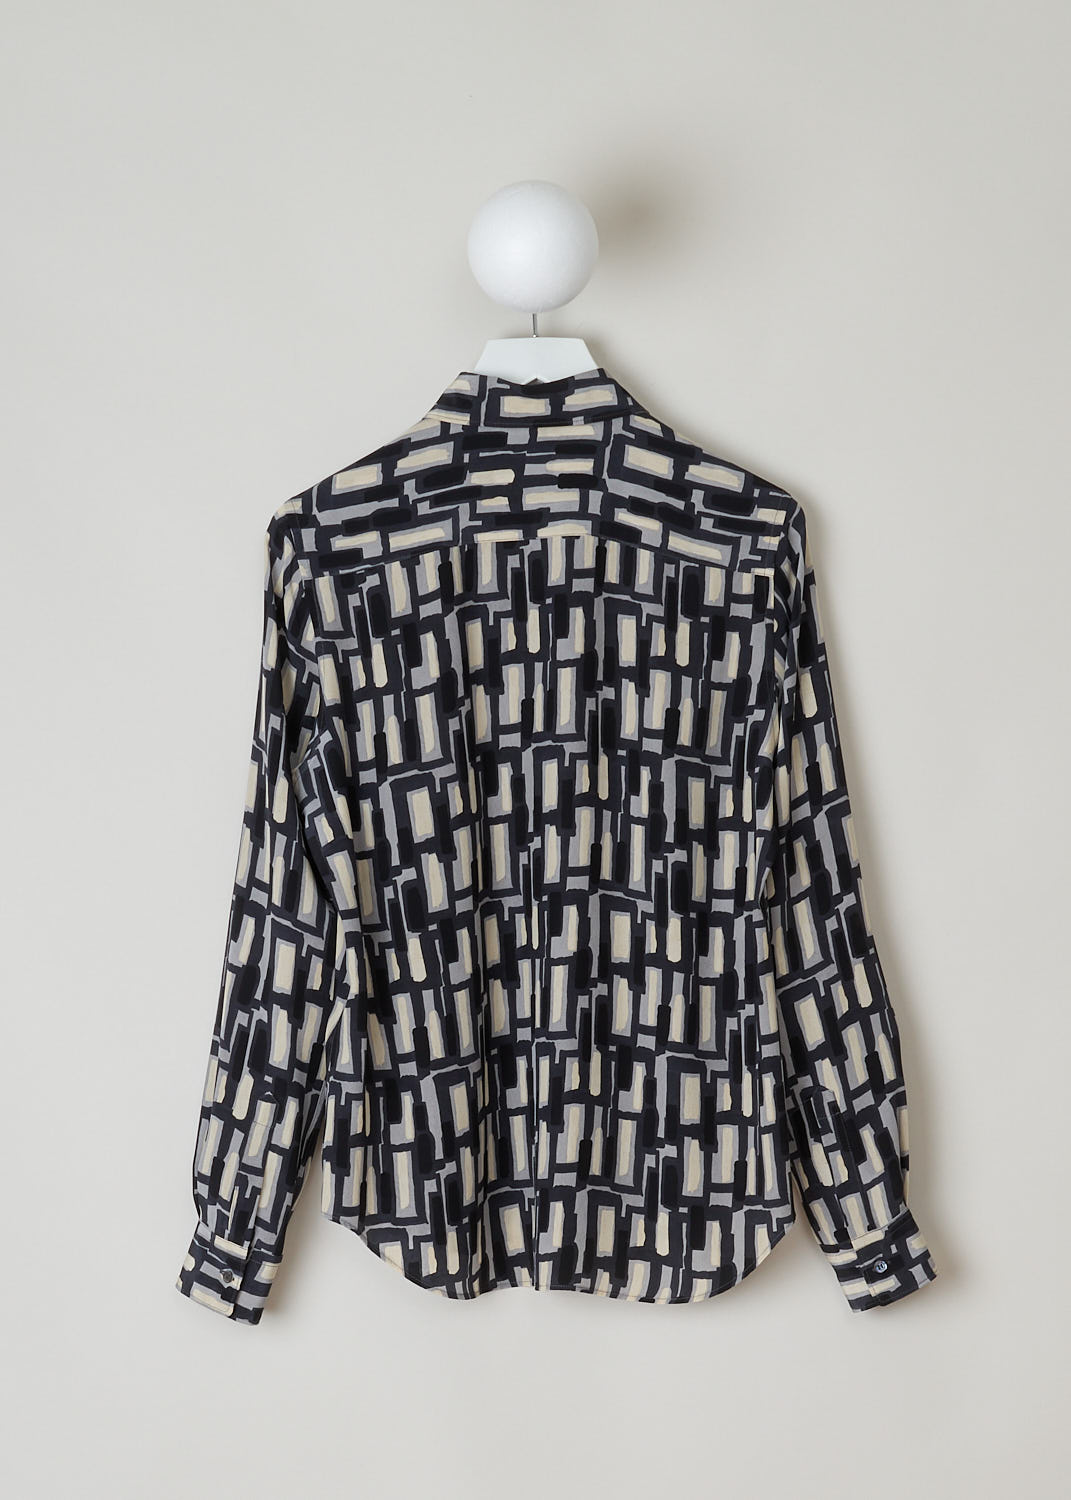 ASPESI, SILK PRINTED BLOUSE, 5422_V126_66173, Print, Back, This long sleeved blouse has a geometric print in black, grey and off-white hues. The blouse has a classic collar, front button closure and an asymmetric finish, meaning the back is slightly longer than the front. 
